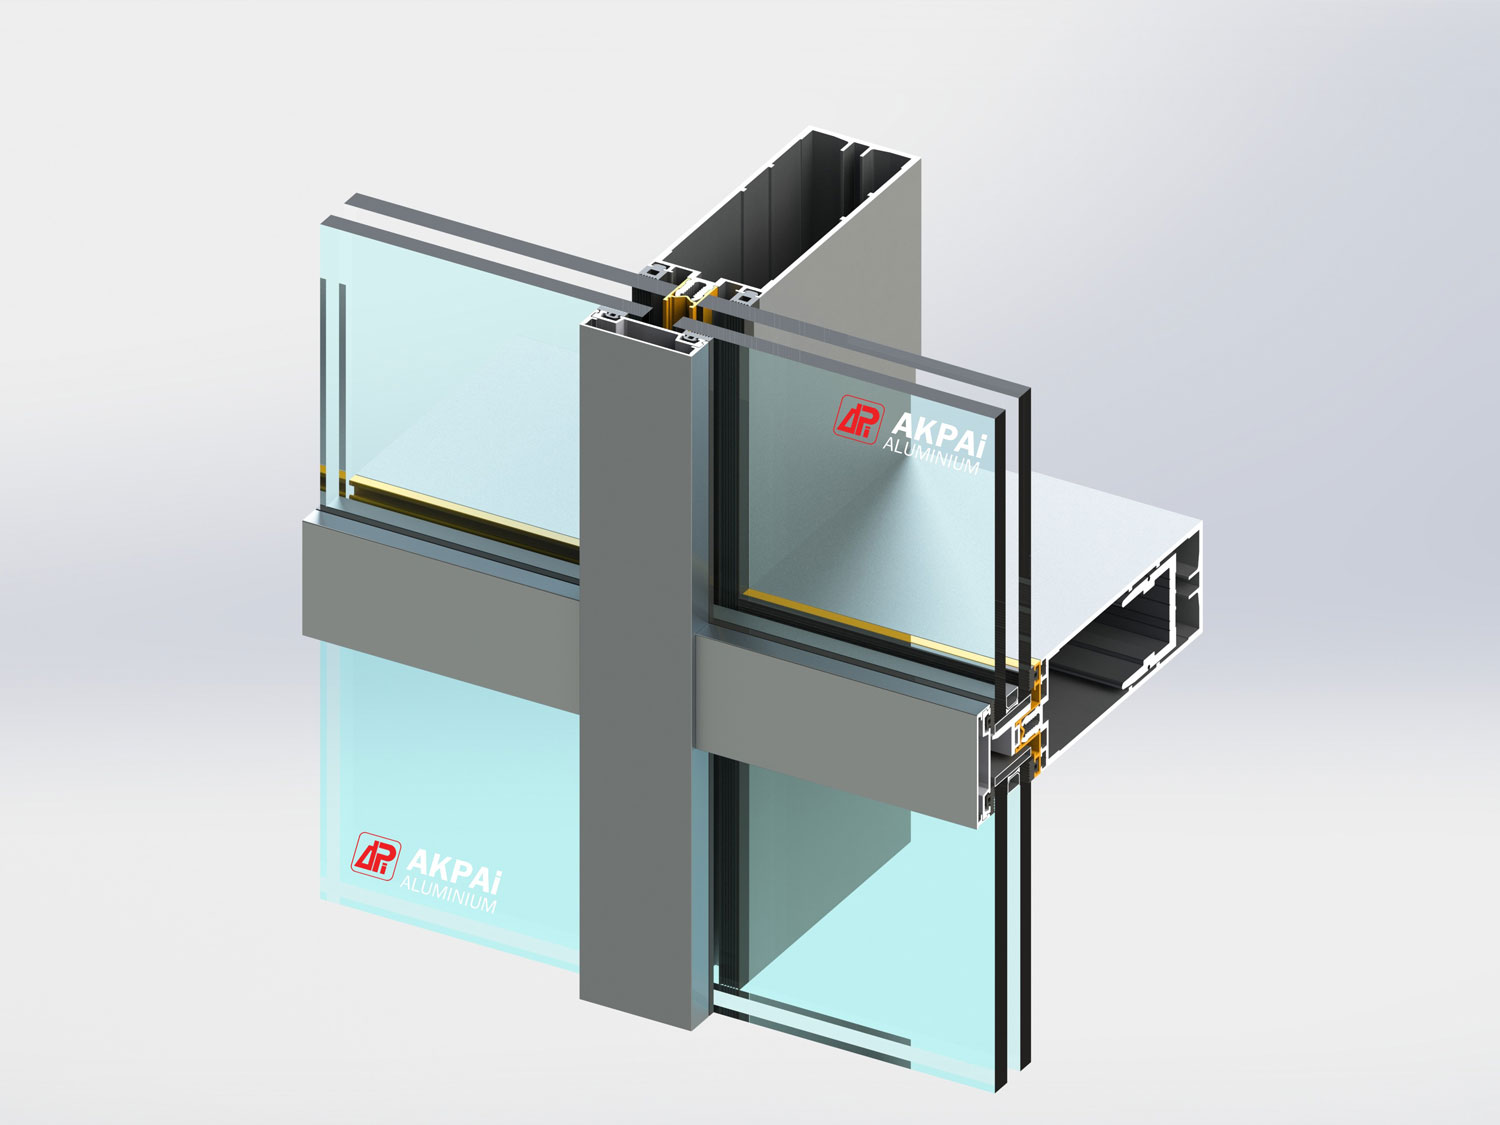 60mm caped curtainwall system